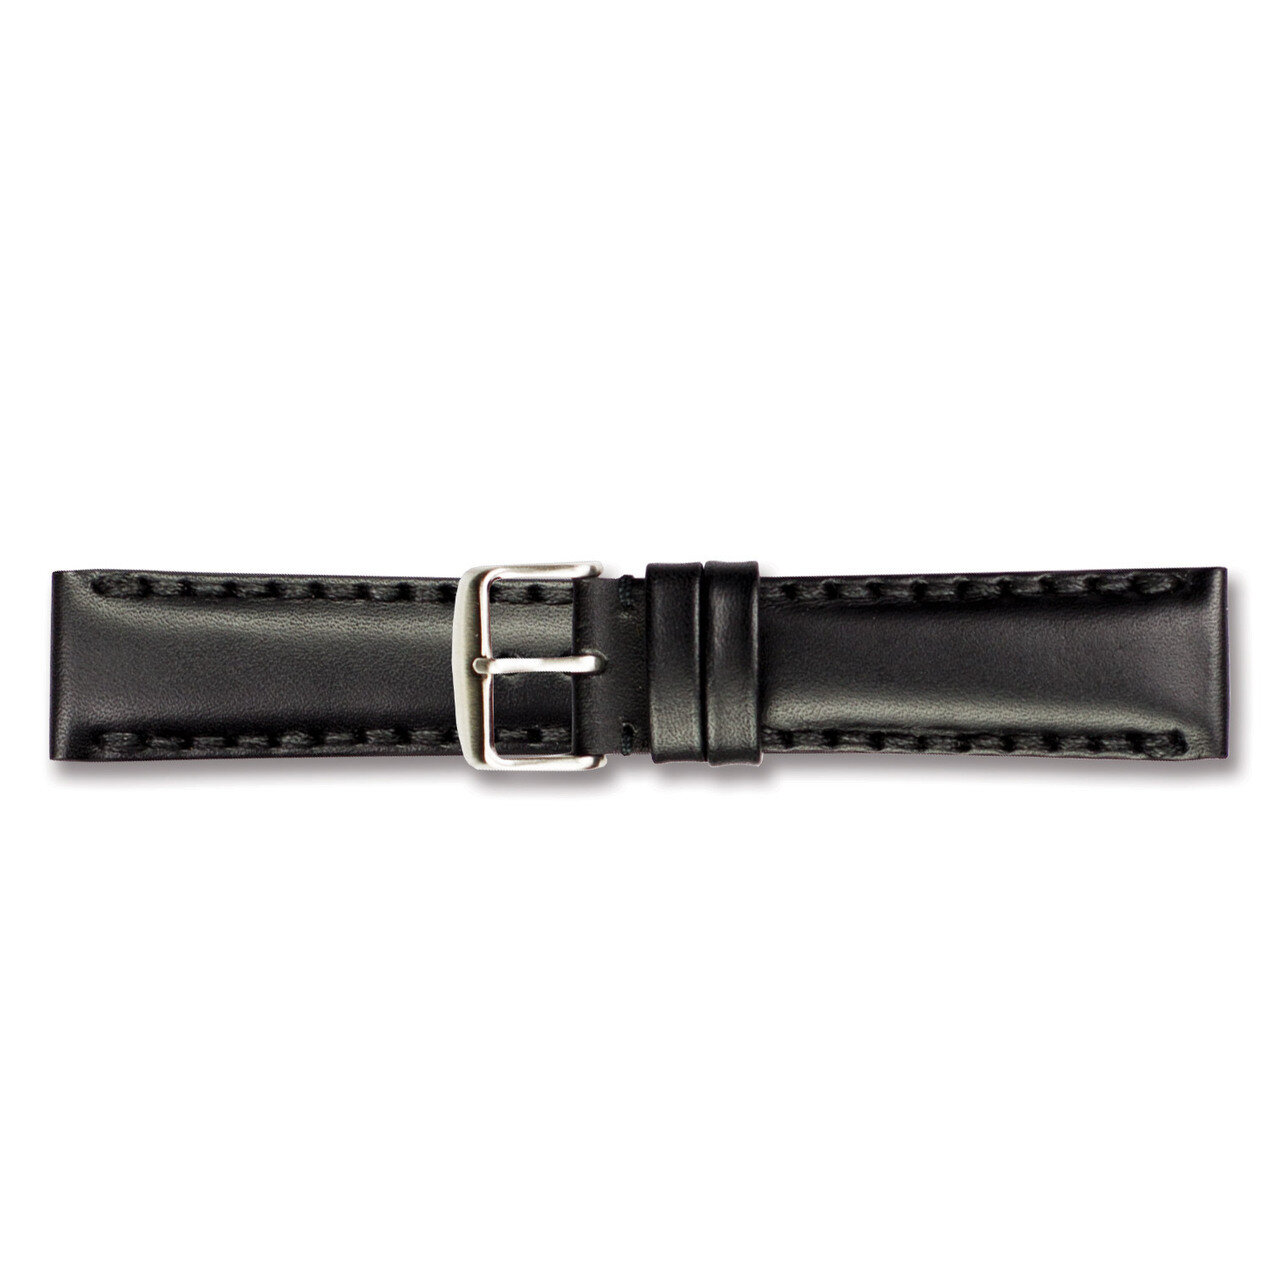 20mm Black Oil Leather Watch Band 7.5 Inch Silver-tone Buckle BAW321-20